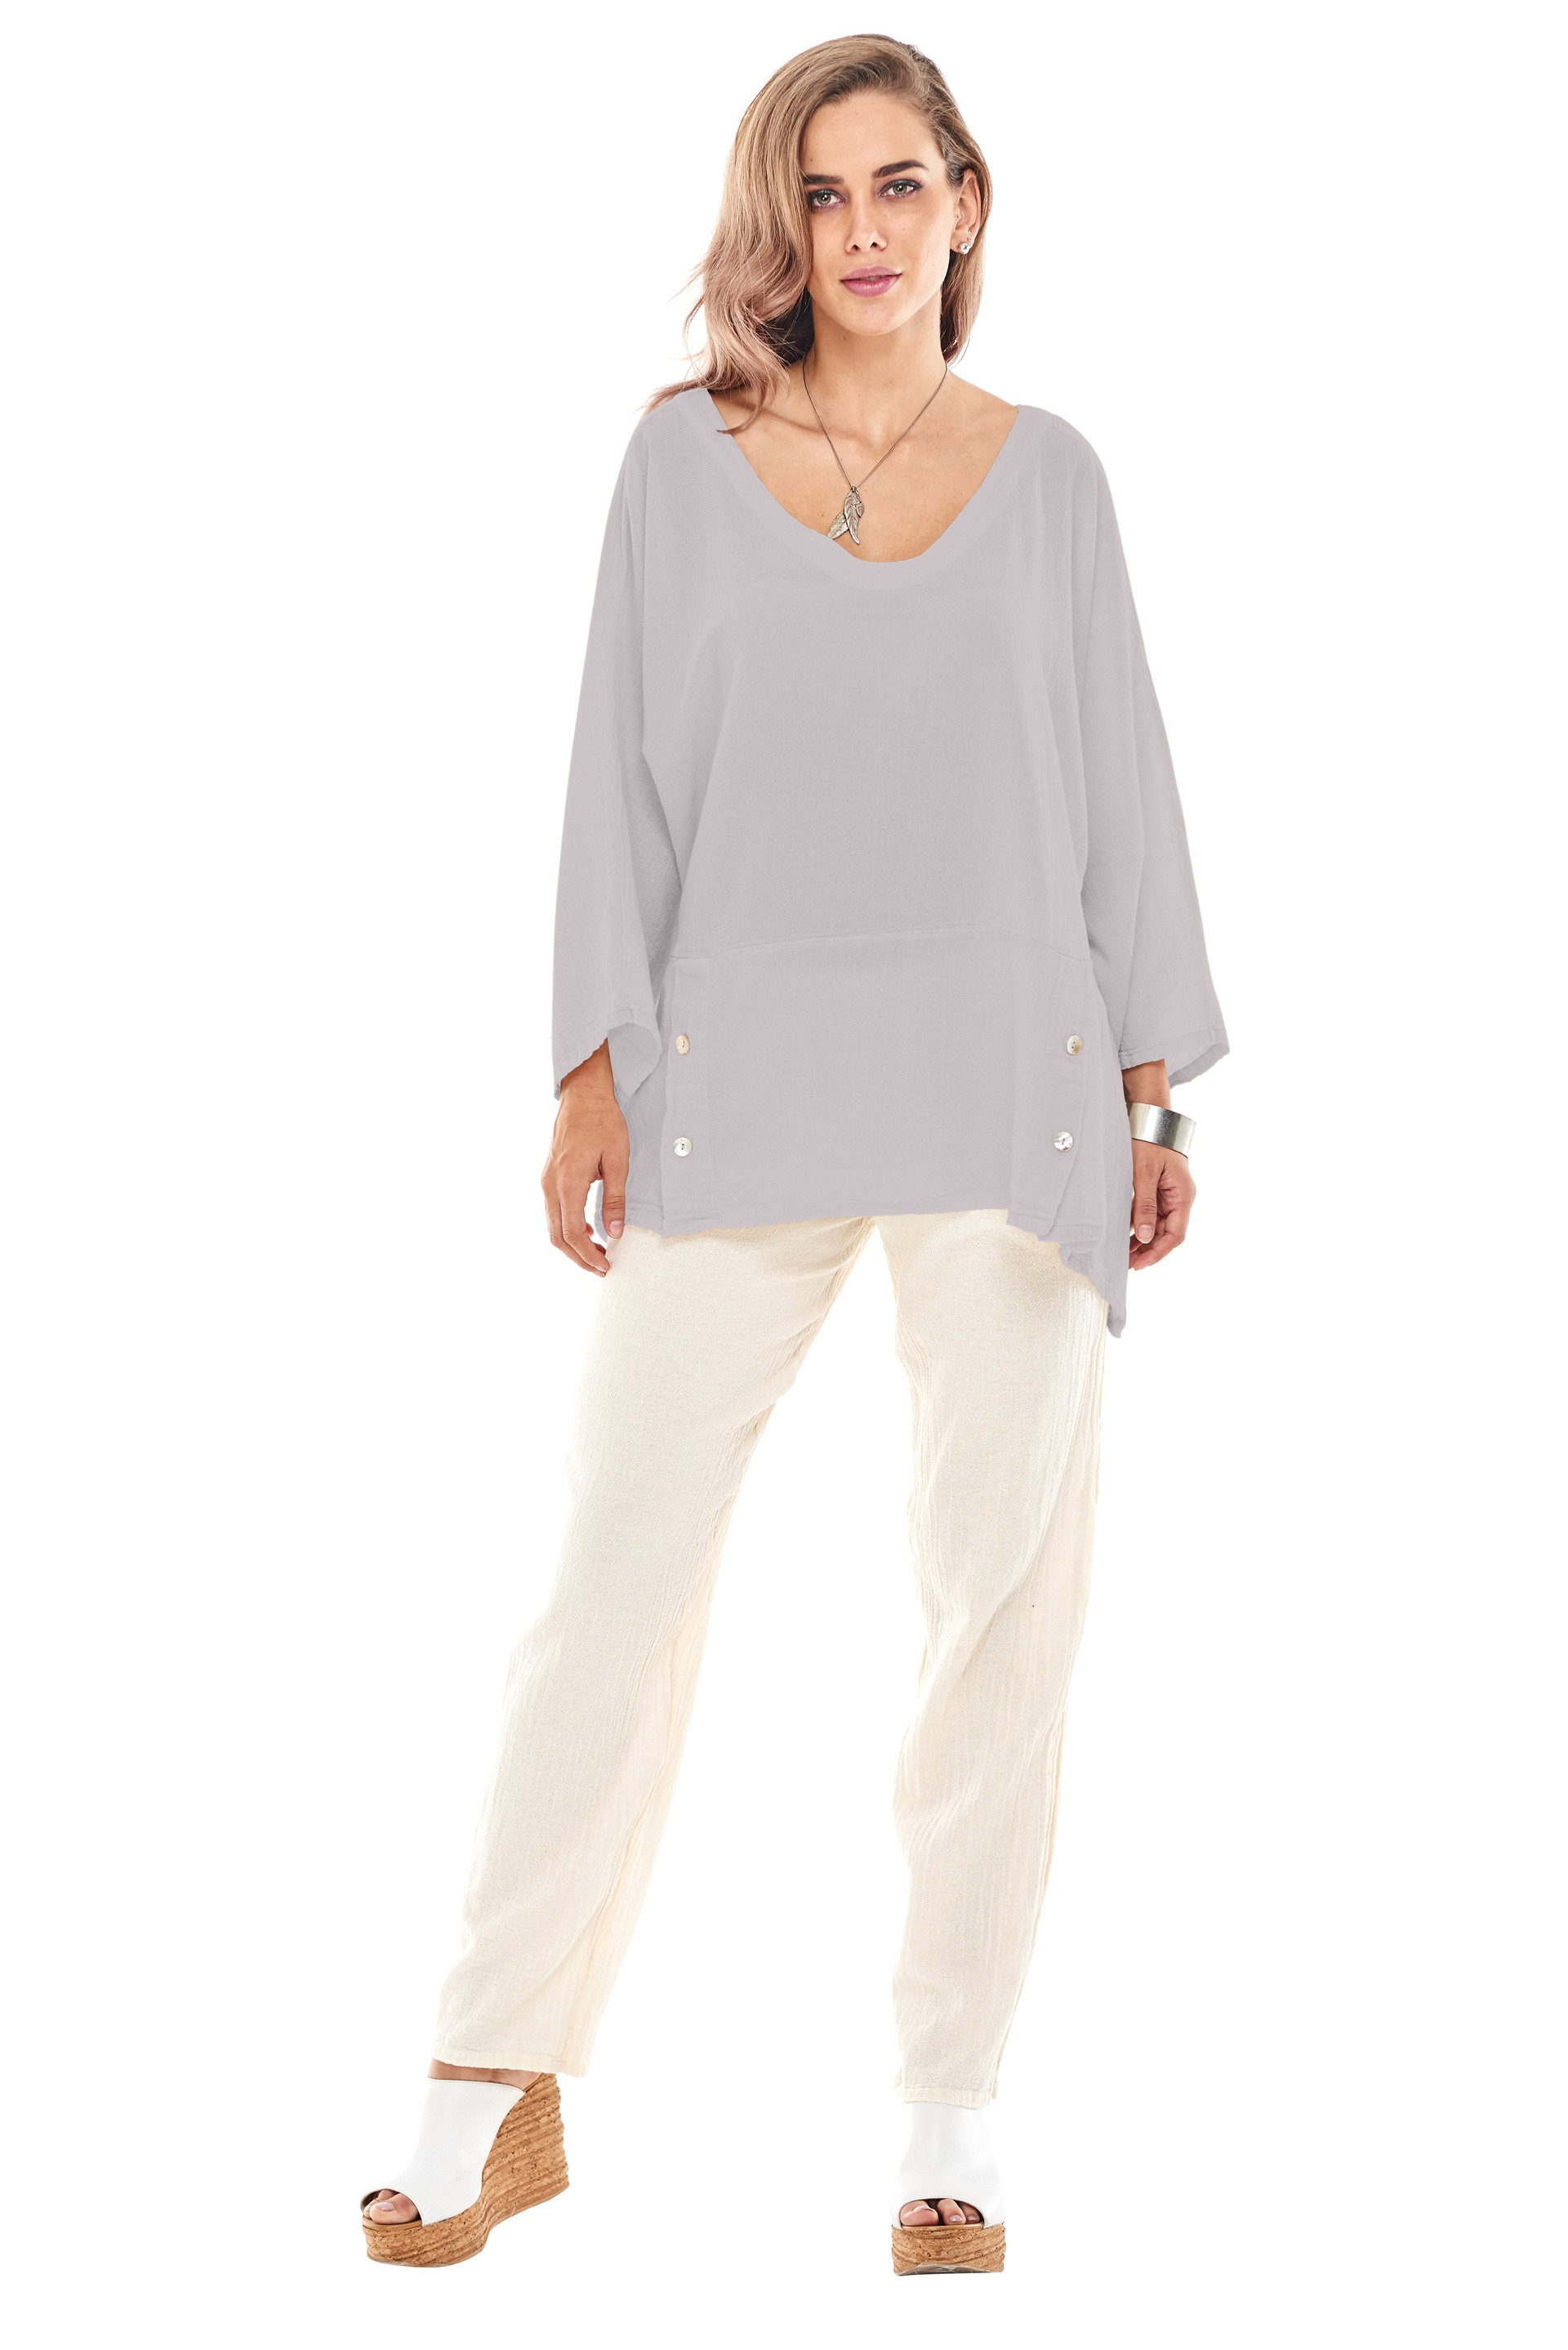 Oh My Gauze Womens Coco Blouse 